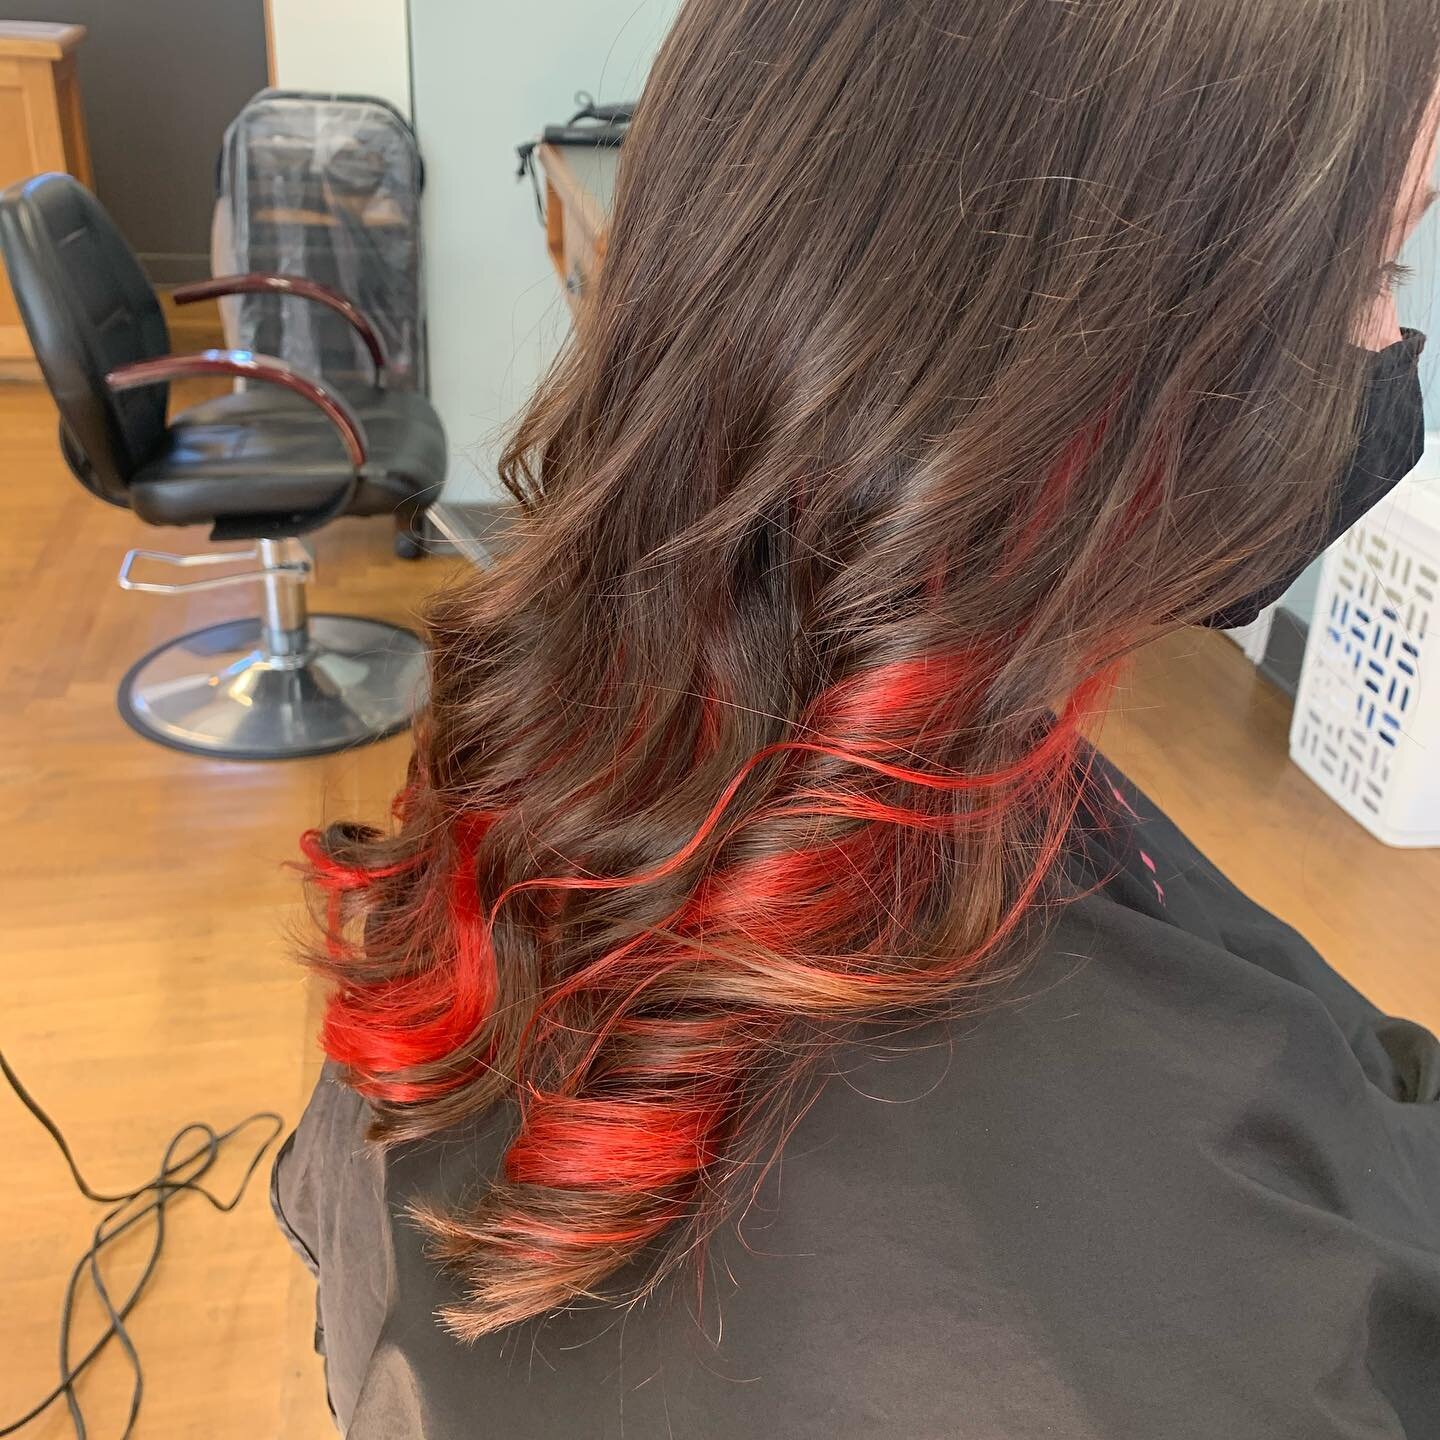 A little red action underneath. Was so happy to play with some fun colour today. #red #colourpop #haircolor #redhair #curls